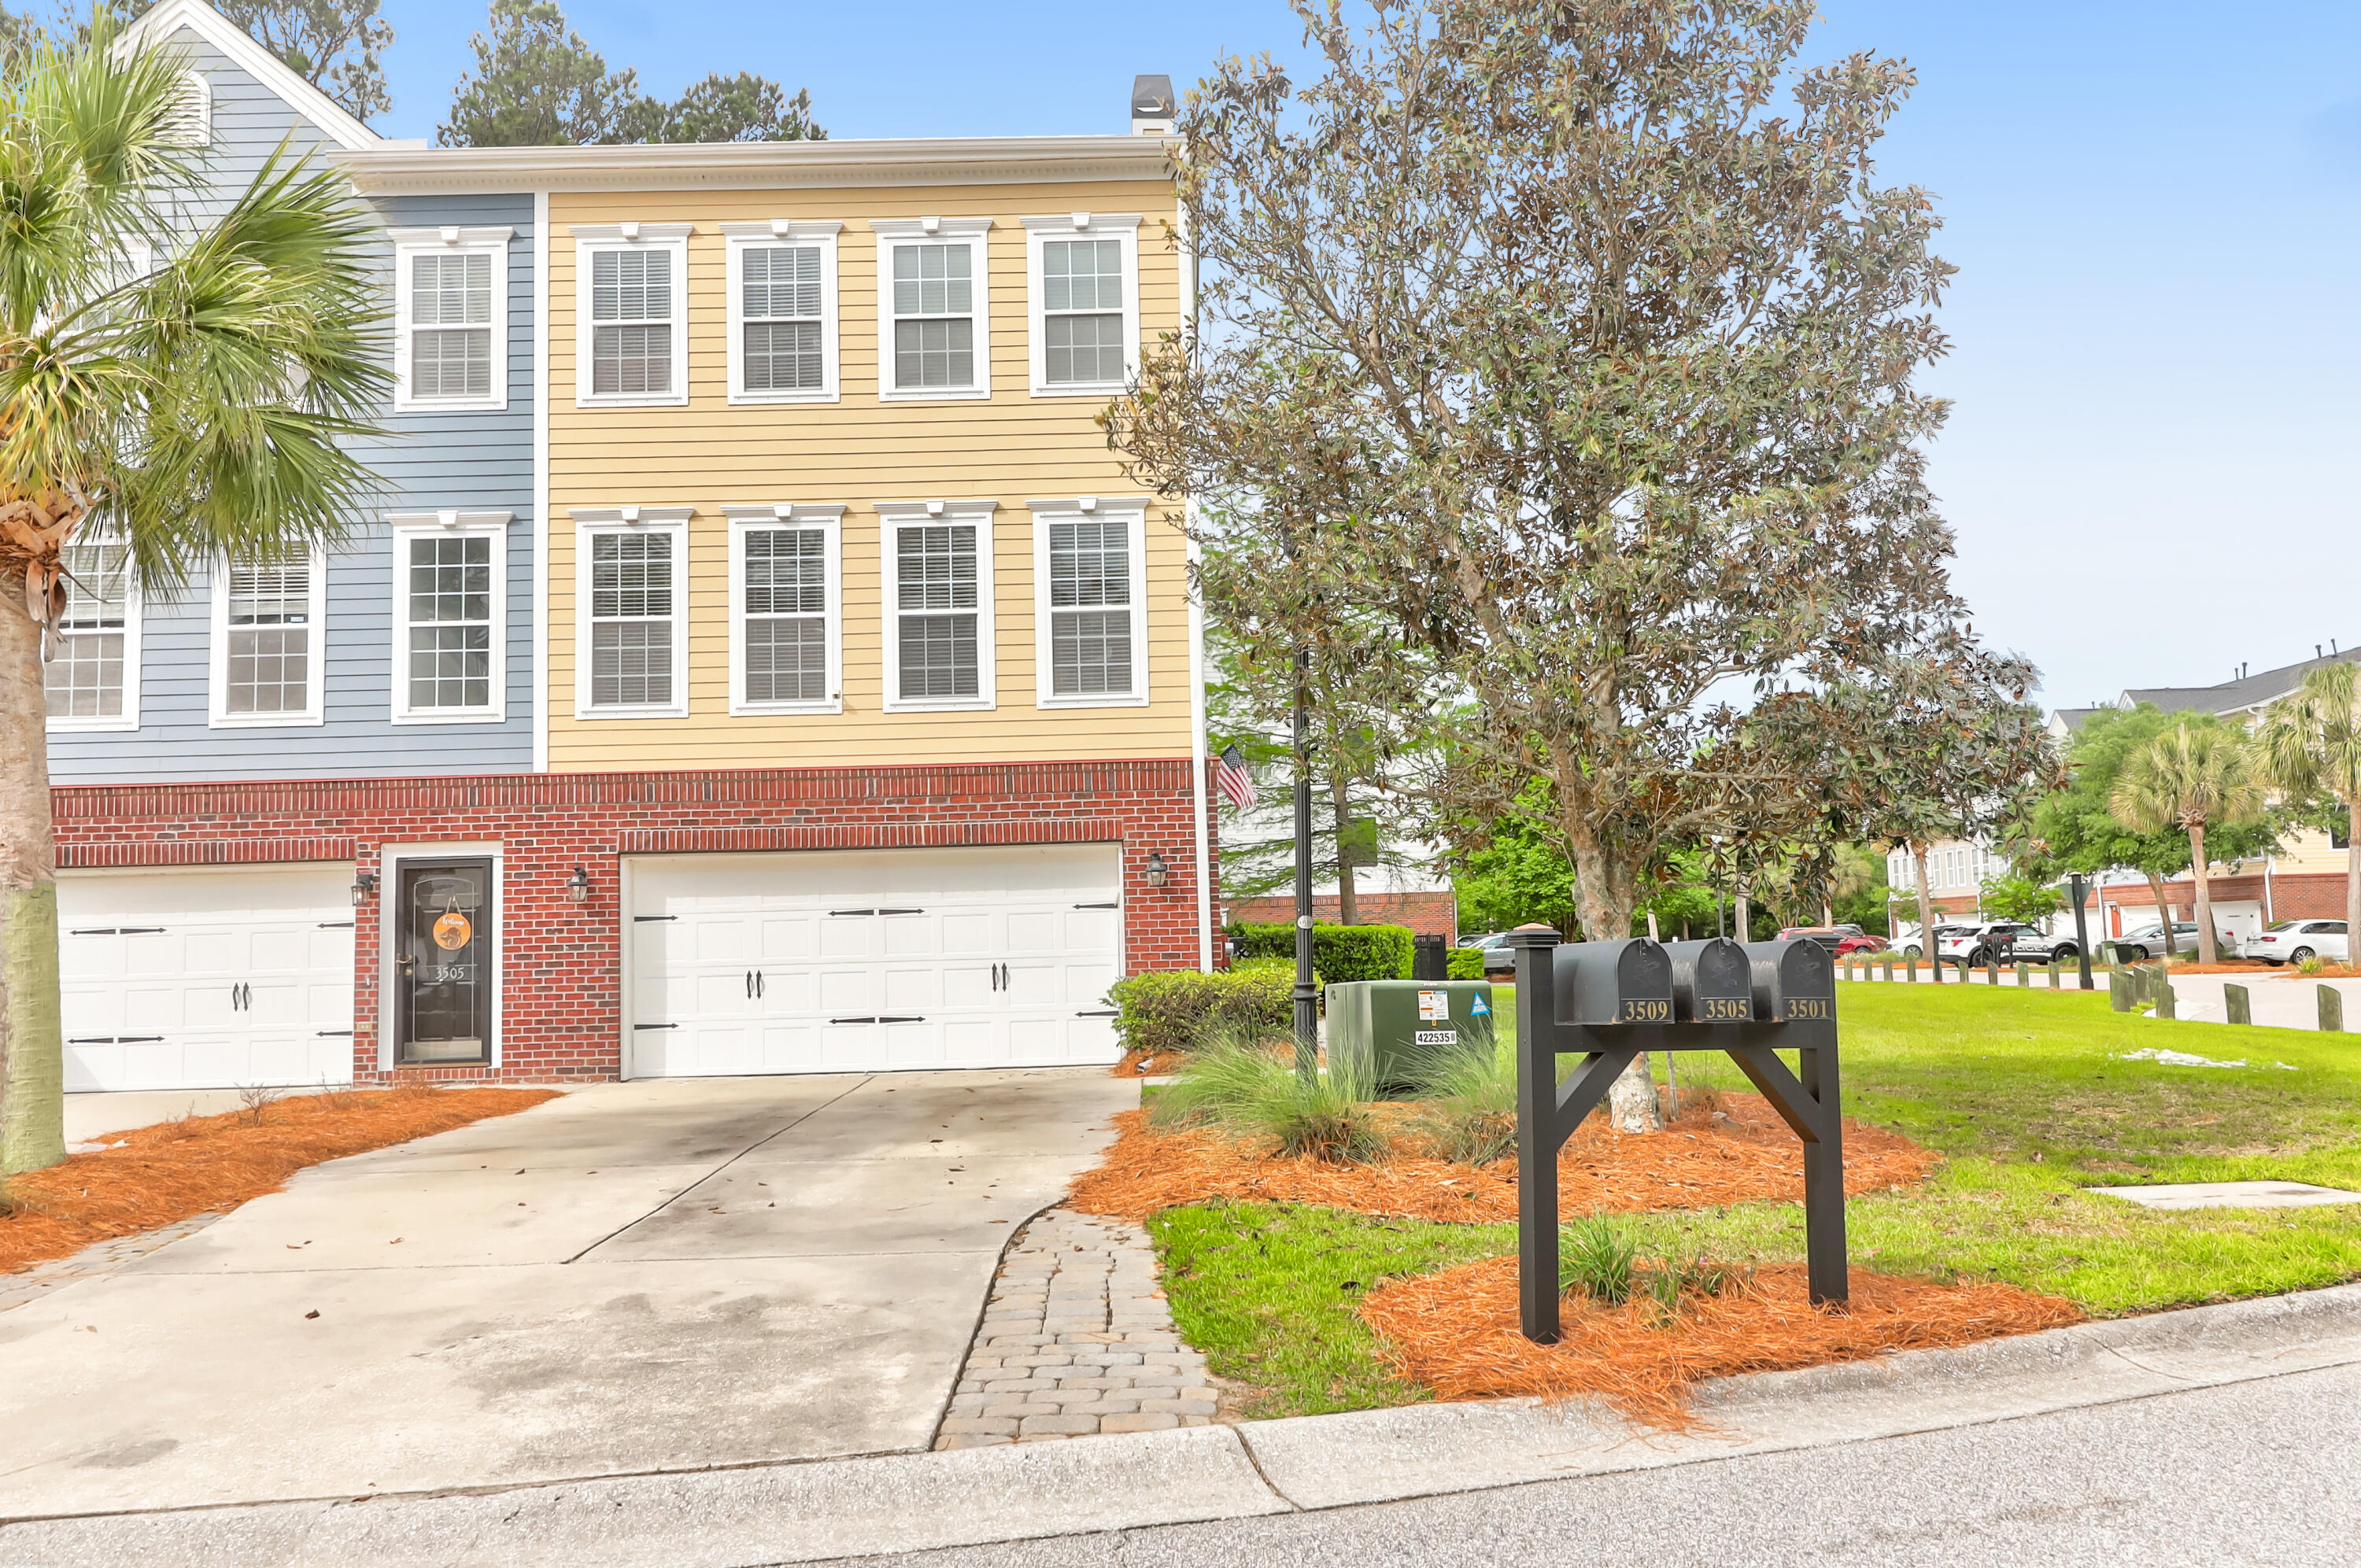 View Mount Pleasant, SC 29466 townhome